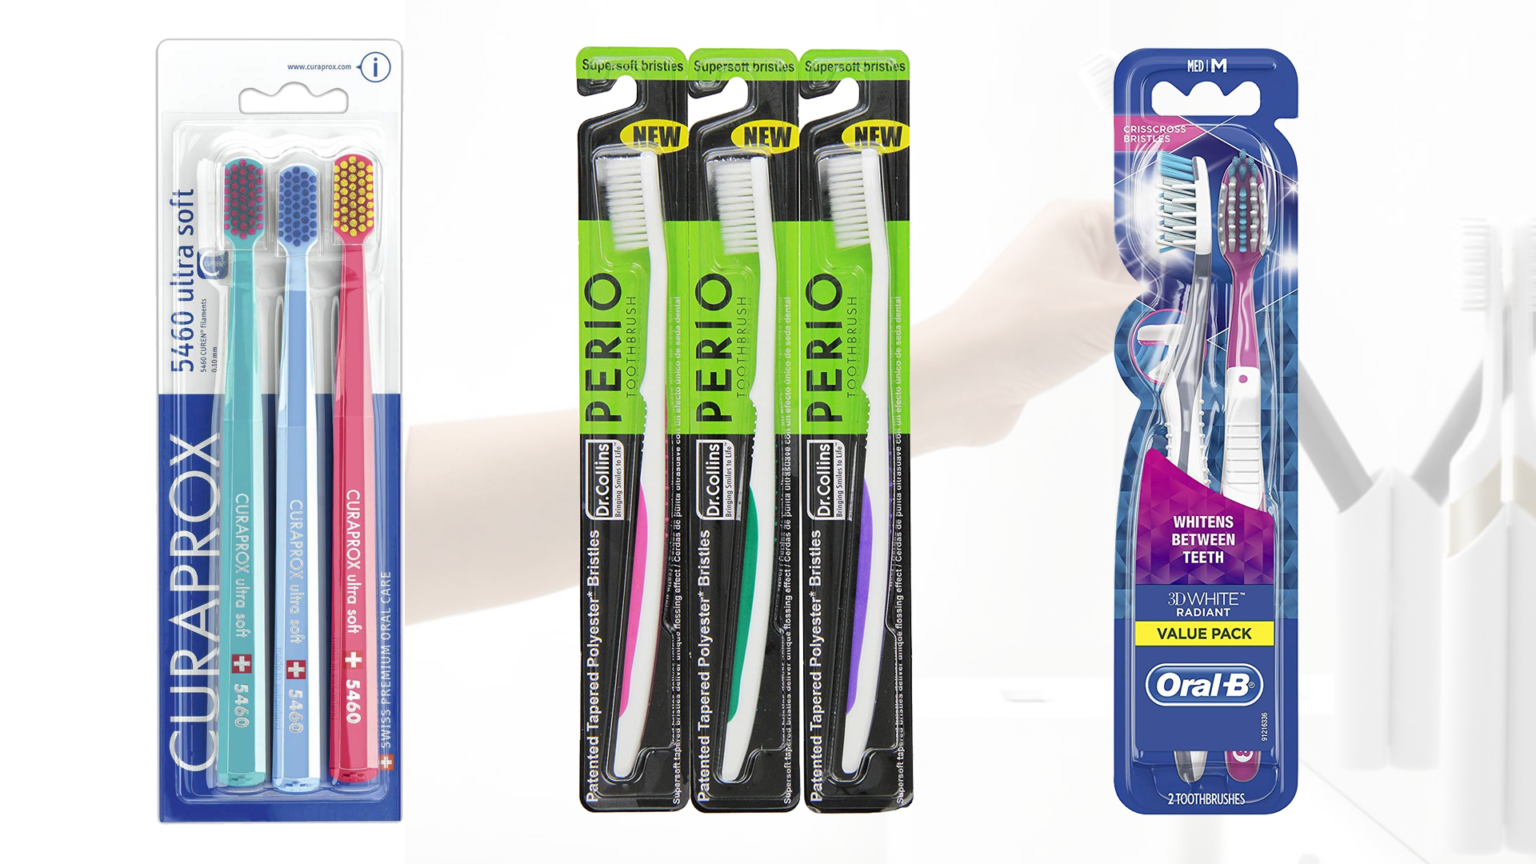 Top 10 Best Manual Toothbrush 2020 Reviews and Buying guide